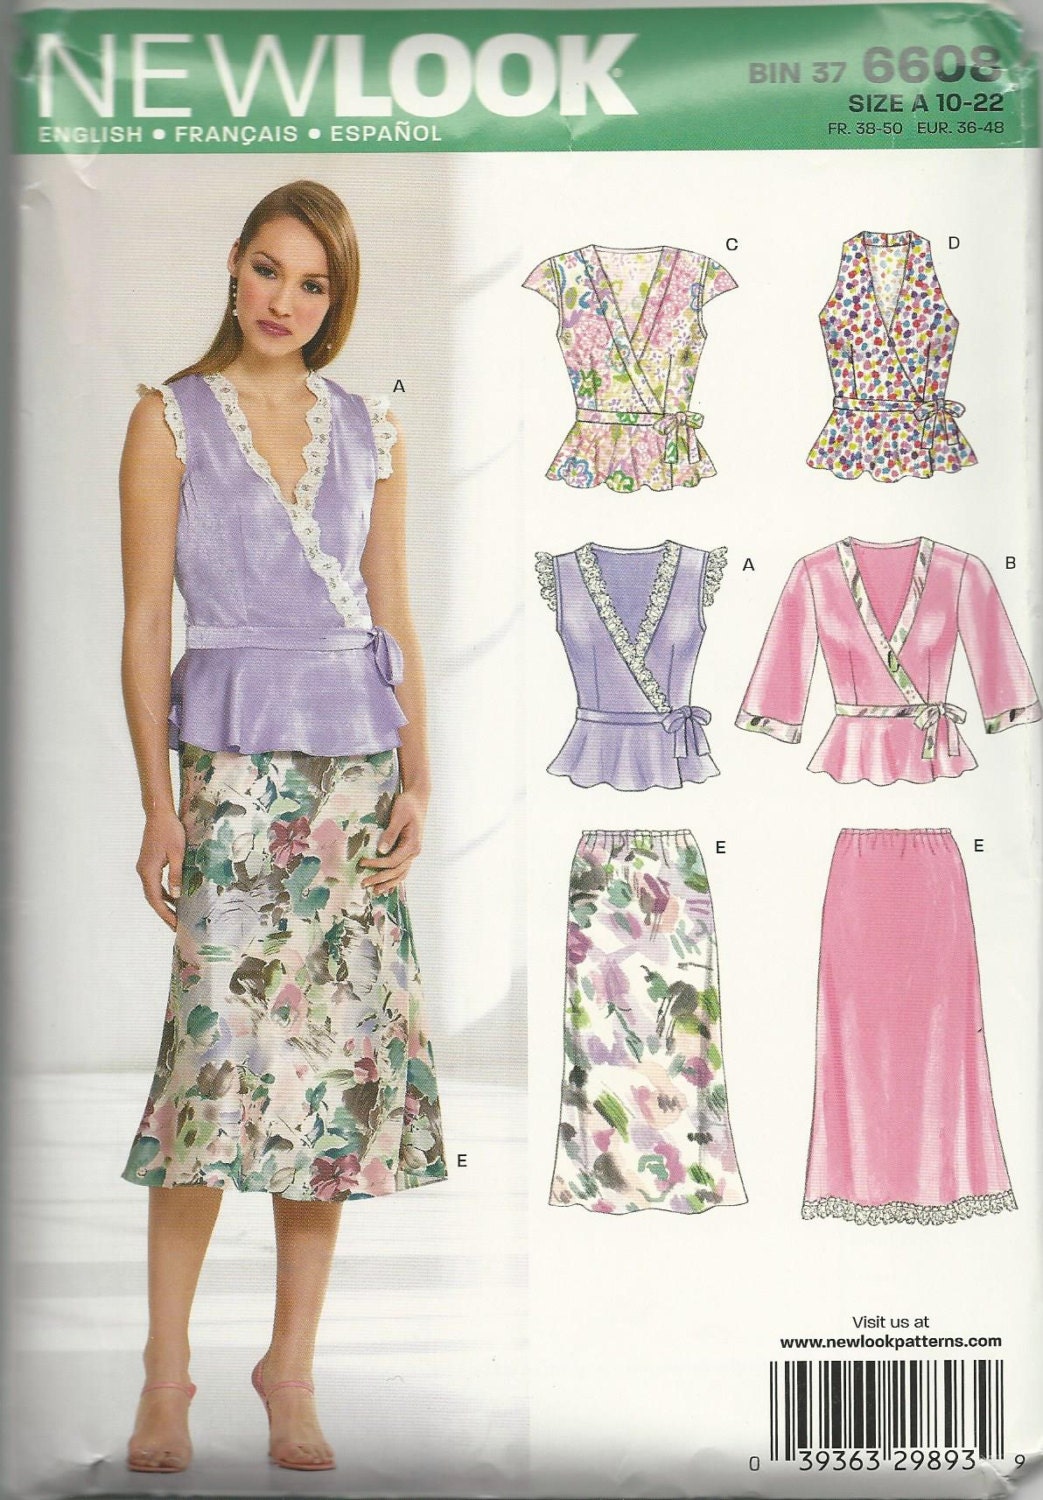 Blouse and Skirt Pattern, New Look pattern Ladies #6608 for a top and skirt